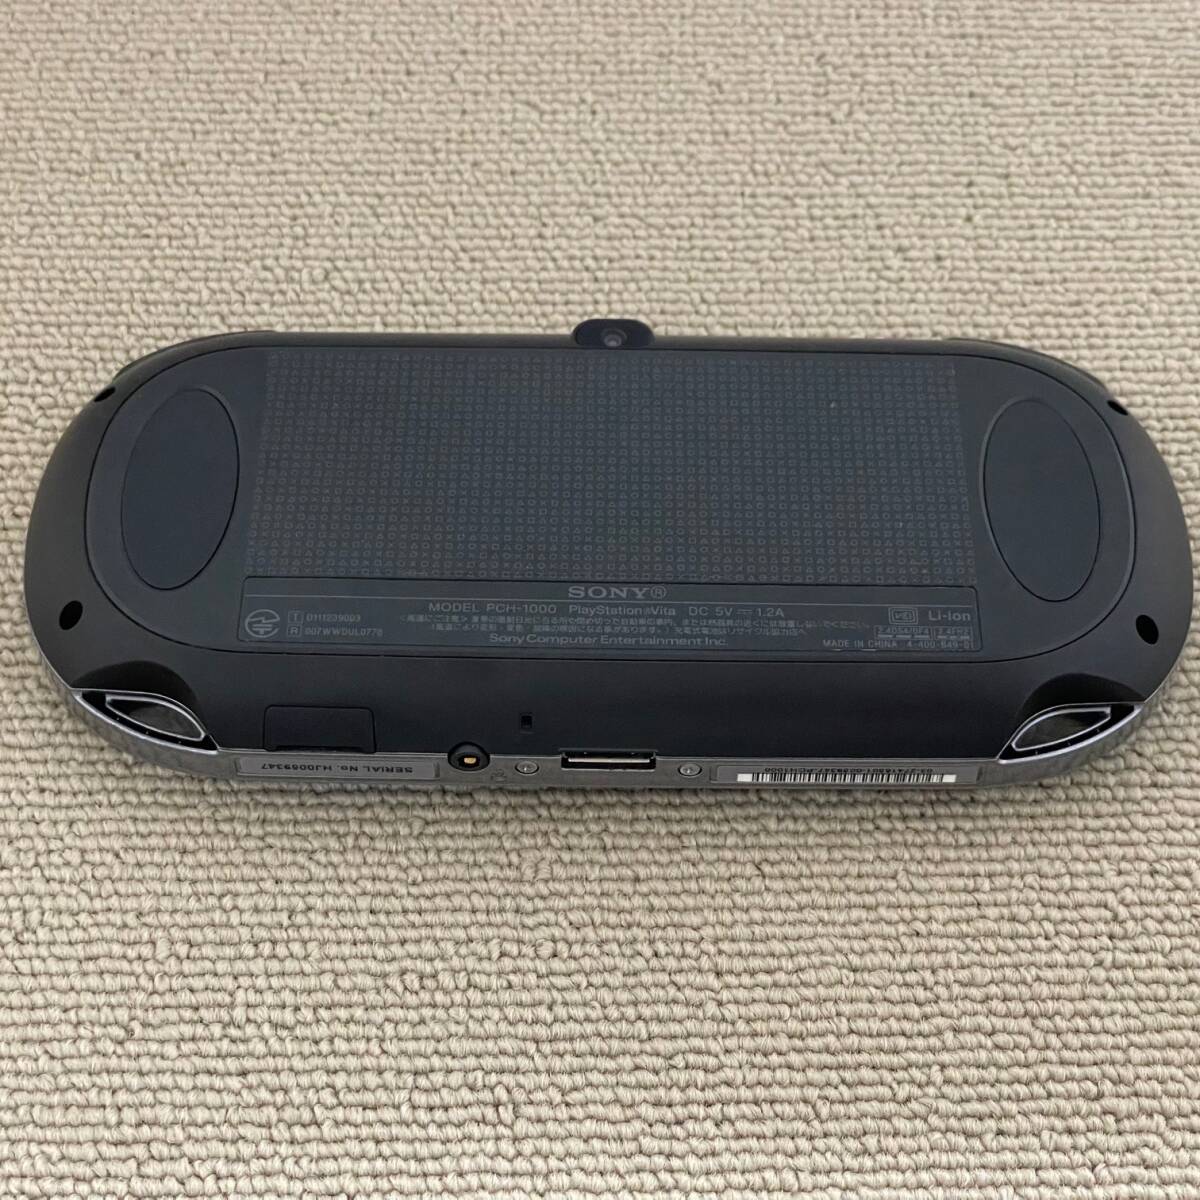  secondhand goods SONY PlayStationVita PCH-1000 black game machine portable 1 jpy from selling out 